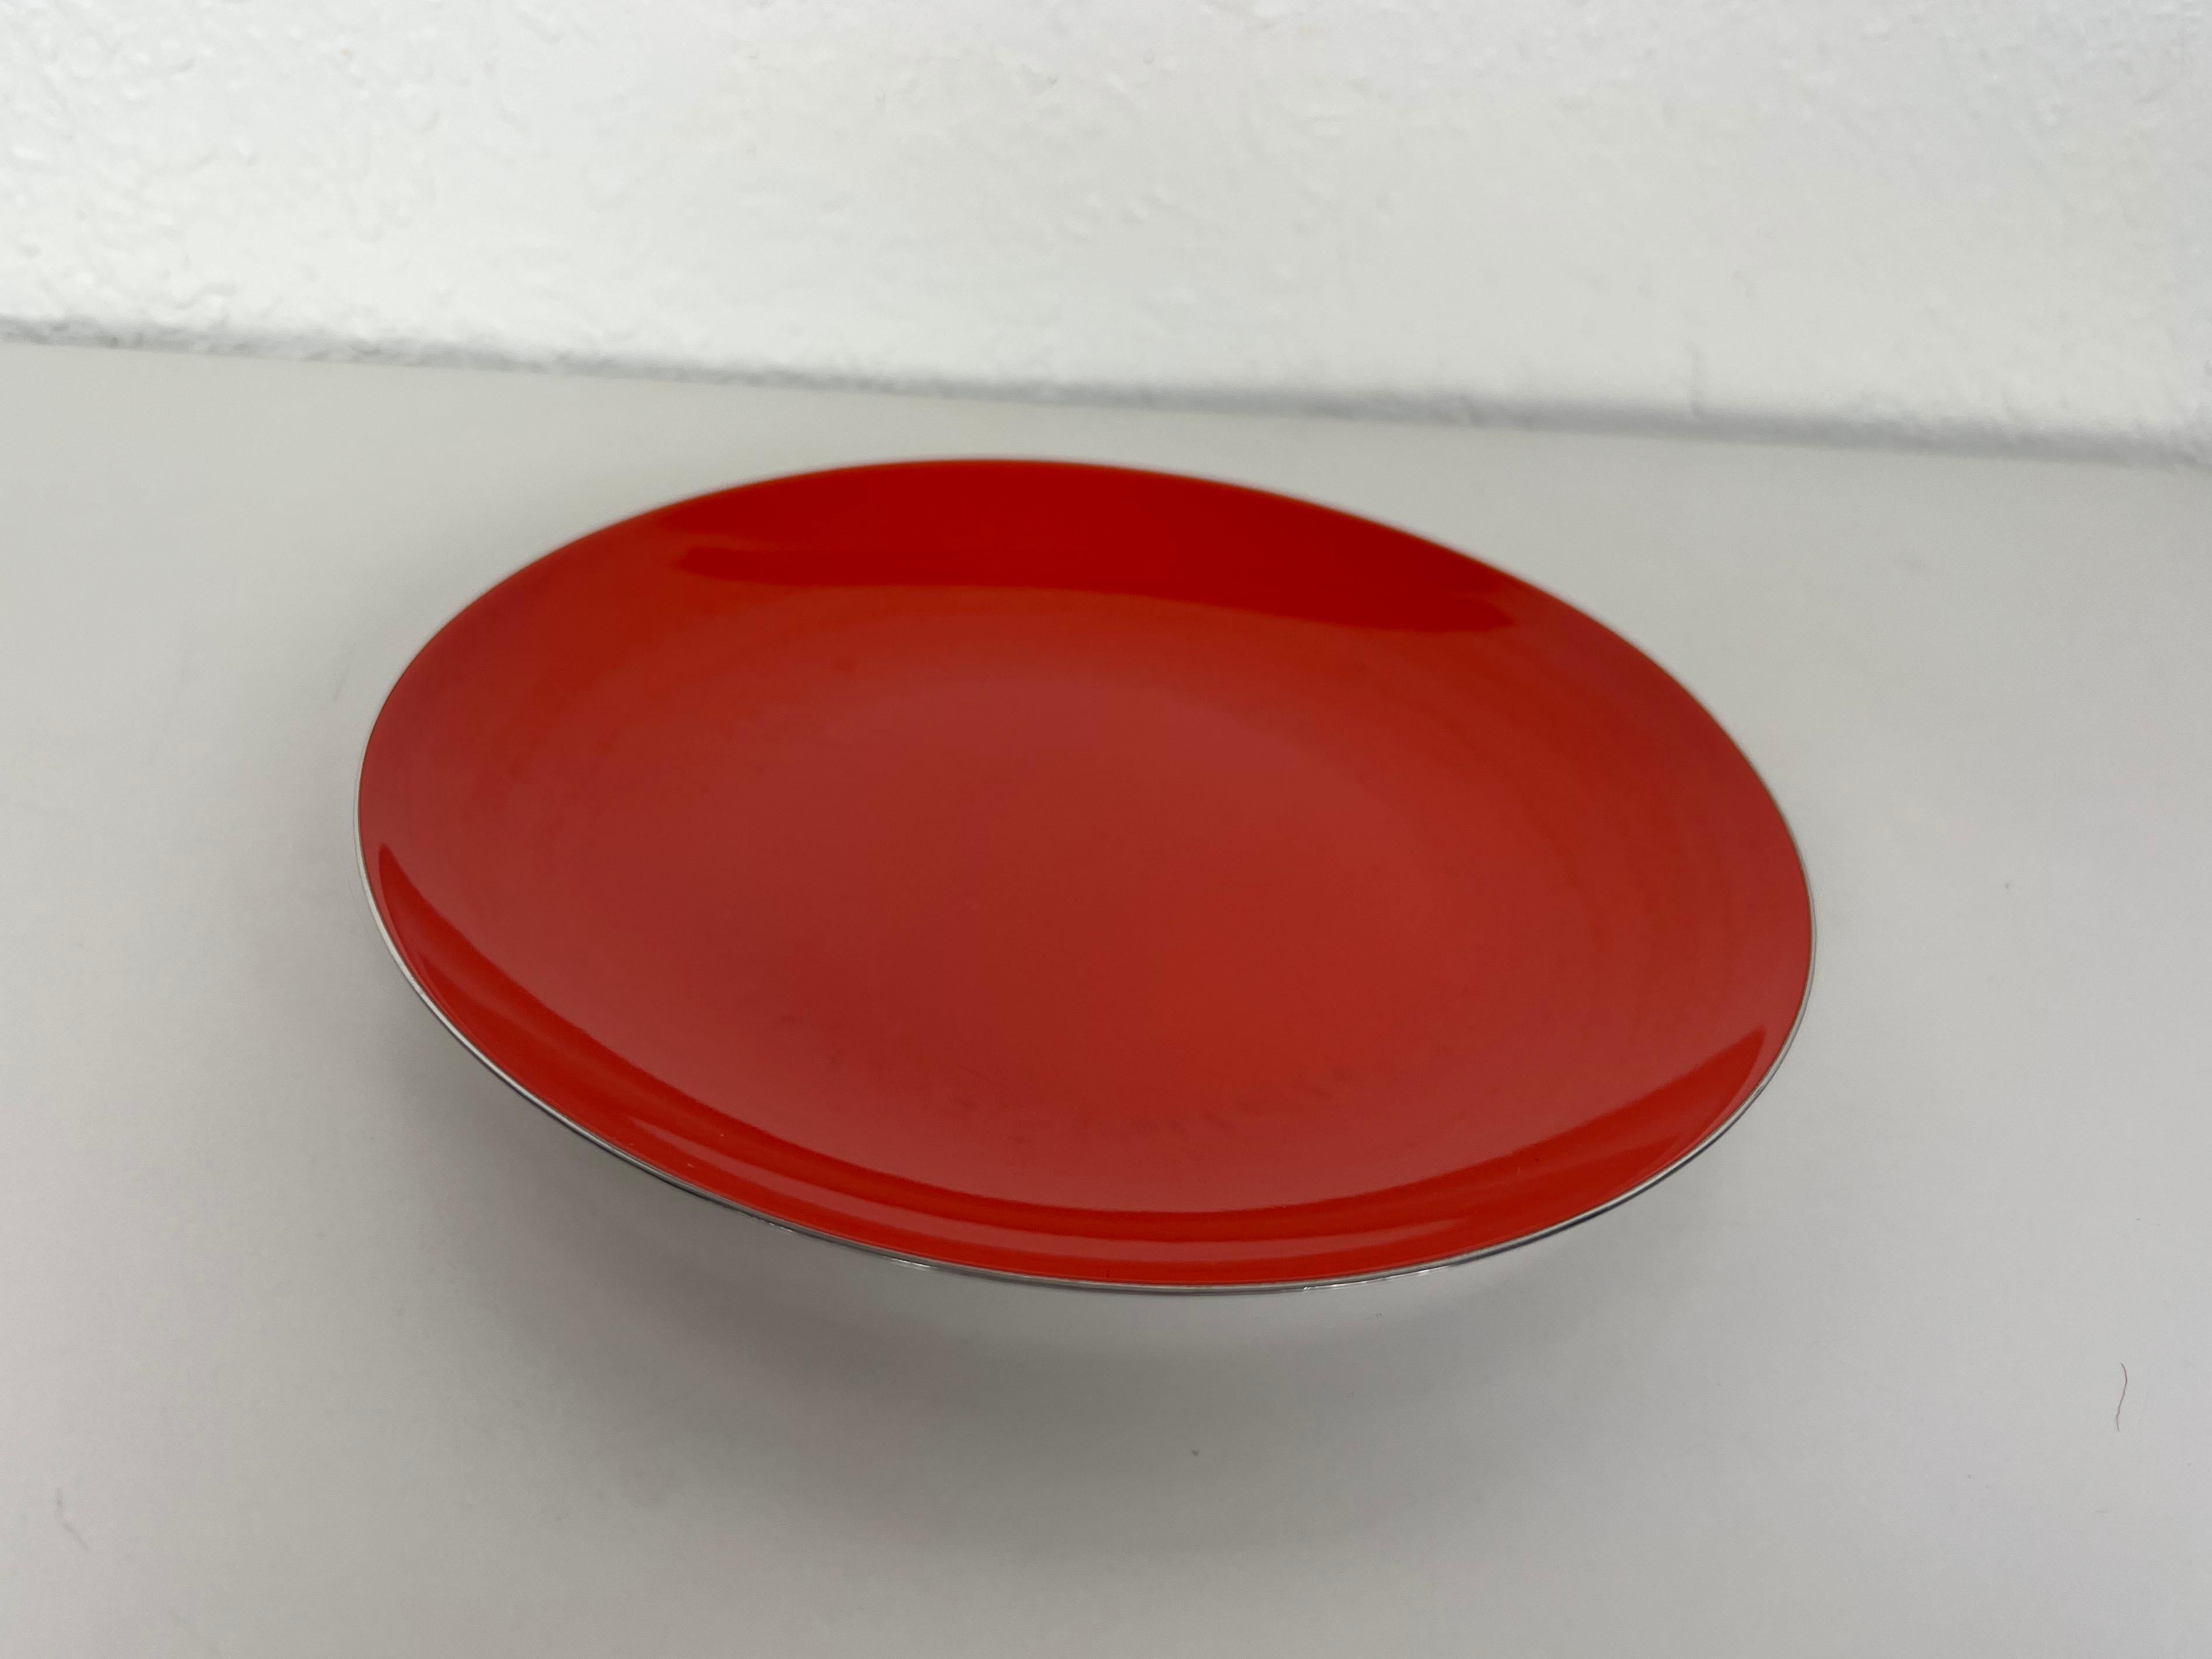 Vintage enameled red stainless steel shallow bowl or plate by Leif Wessmann and Associates, distributed by Knoll International in the 1960s.

Designer: Leif Wessmann

Origin: Norway

Year: 1960s

Style: Mid-Century Modern /